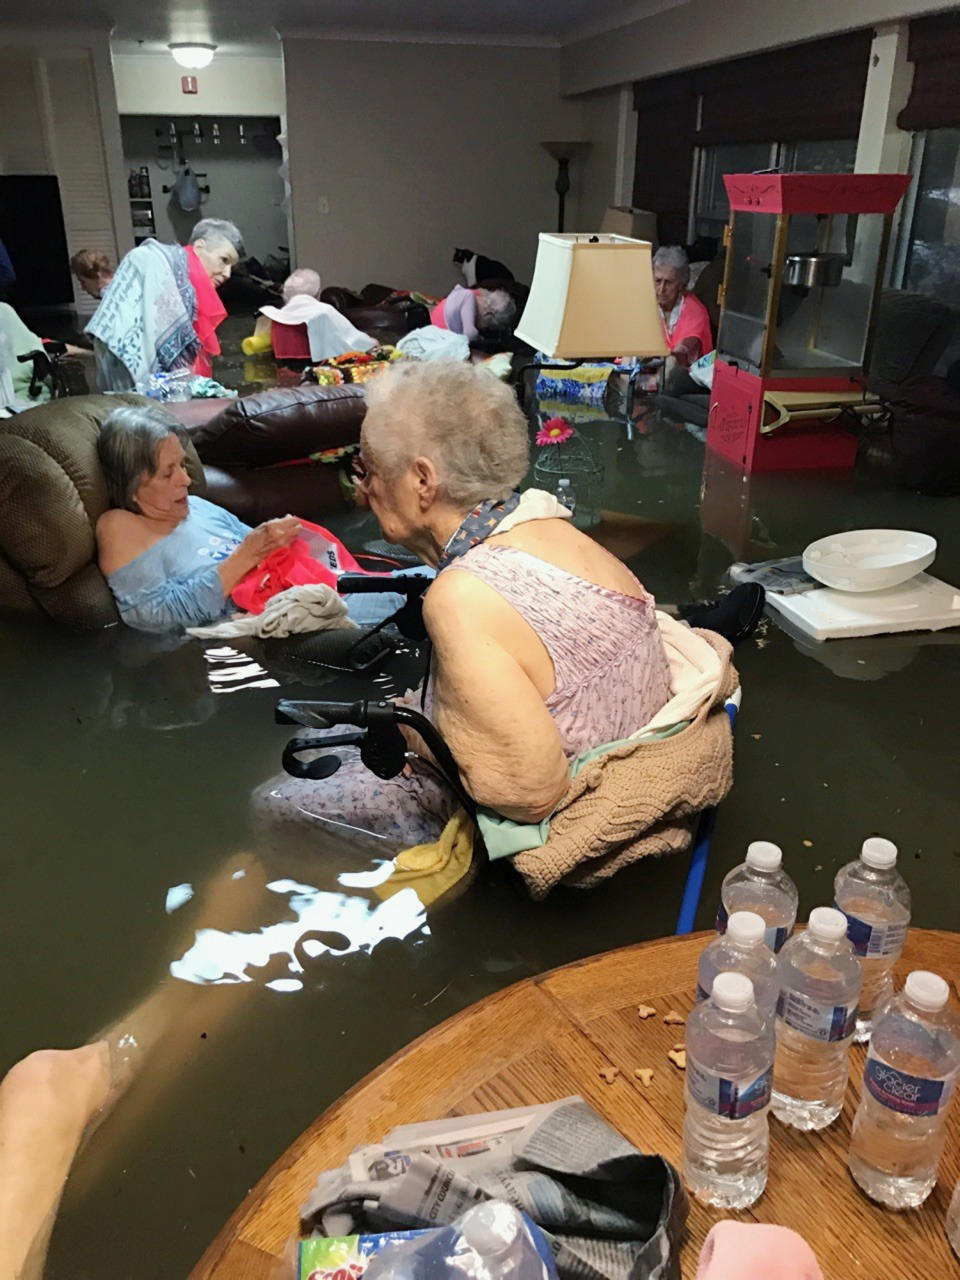 <p>In this Sunday, Aug. 27, 2017, photo provided by Trudy Lampson, residents of the La Vita Bella nursing home in Dickinson, Texas, sit in waist-deep flood waters caused by Hurricane Harvey. Authorities said all the residents were safely evacuated from the facility. (Photo: Trudy Lampson via AP) </p>